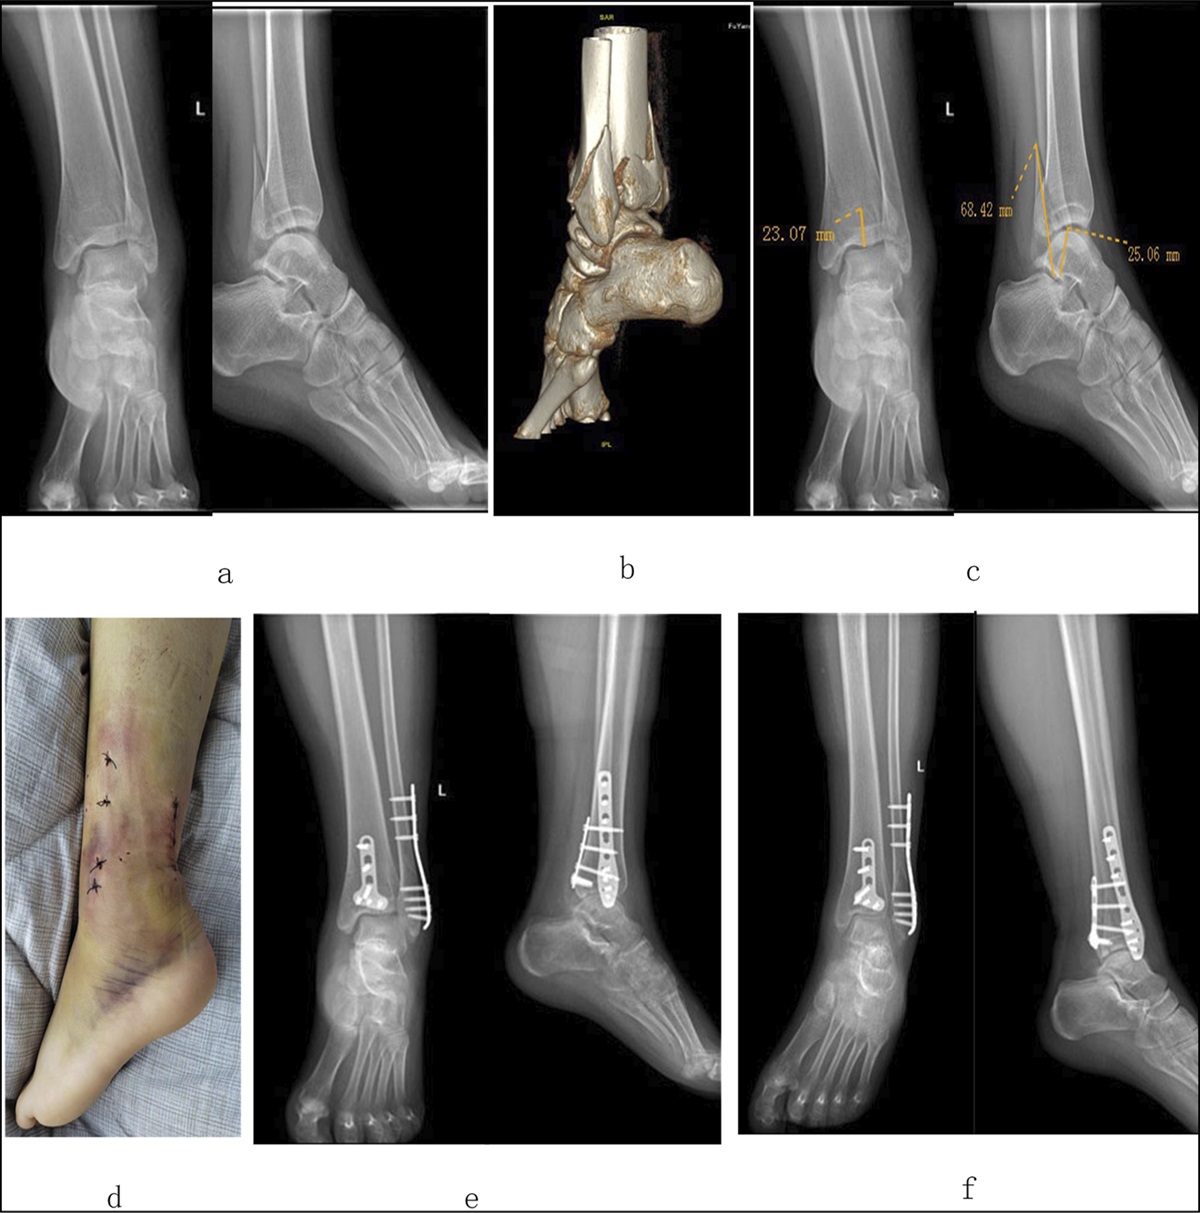 Limb Fractures Treated With the Novel Plate Osteosynthesis Application Technique: Second to Minimally Invasive Plates osteosynthesis